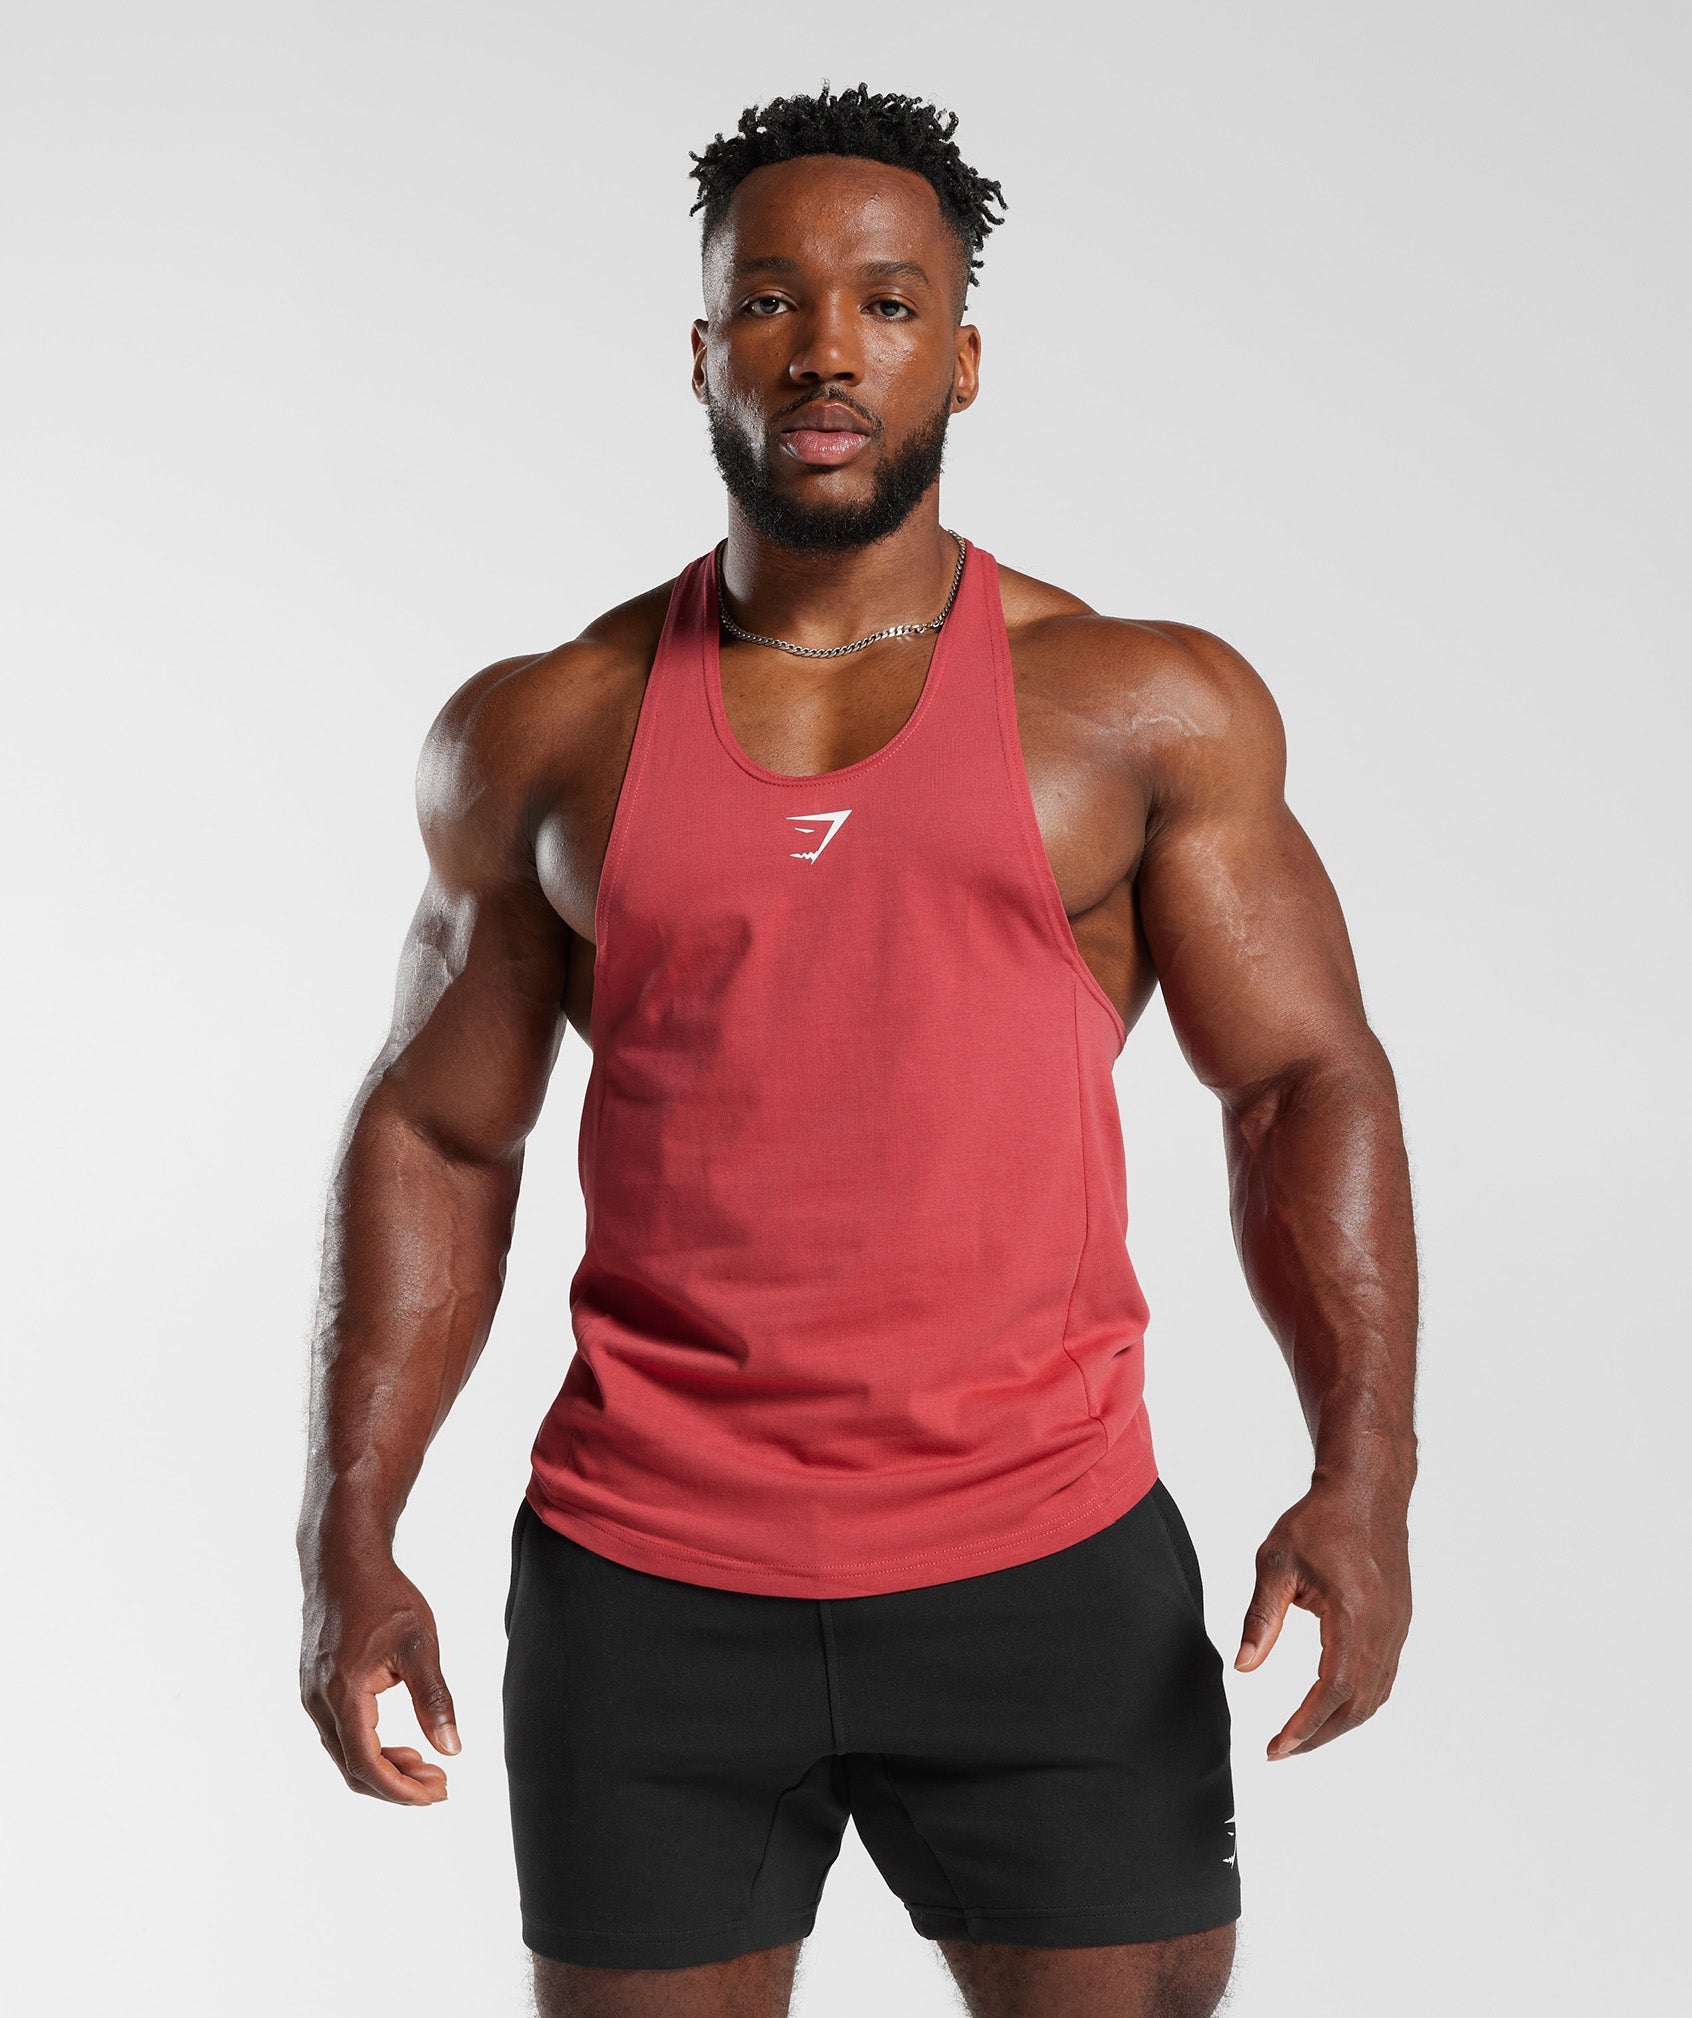 Gymshark - Gymshark Alias Stringer Available now. Make your gym session  even more productive with this sensational product from Gymshark.